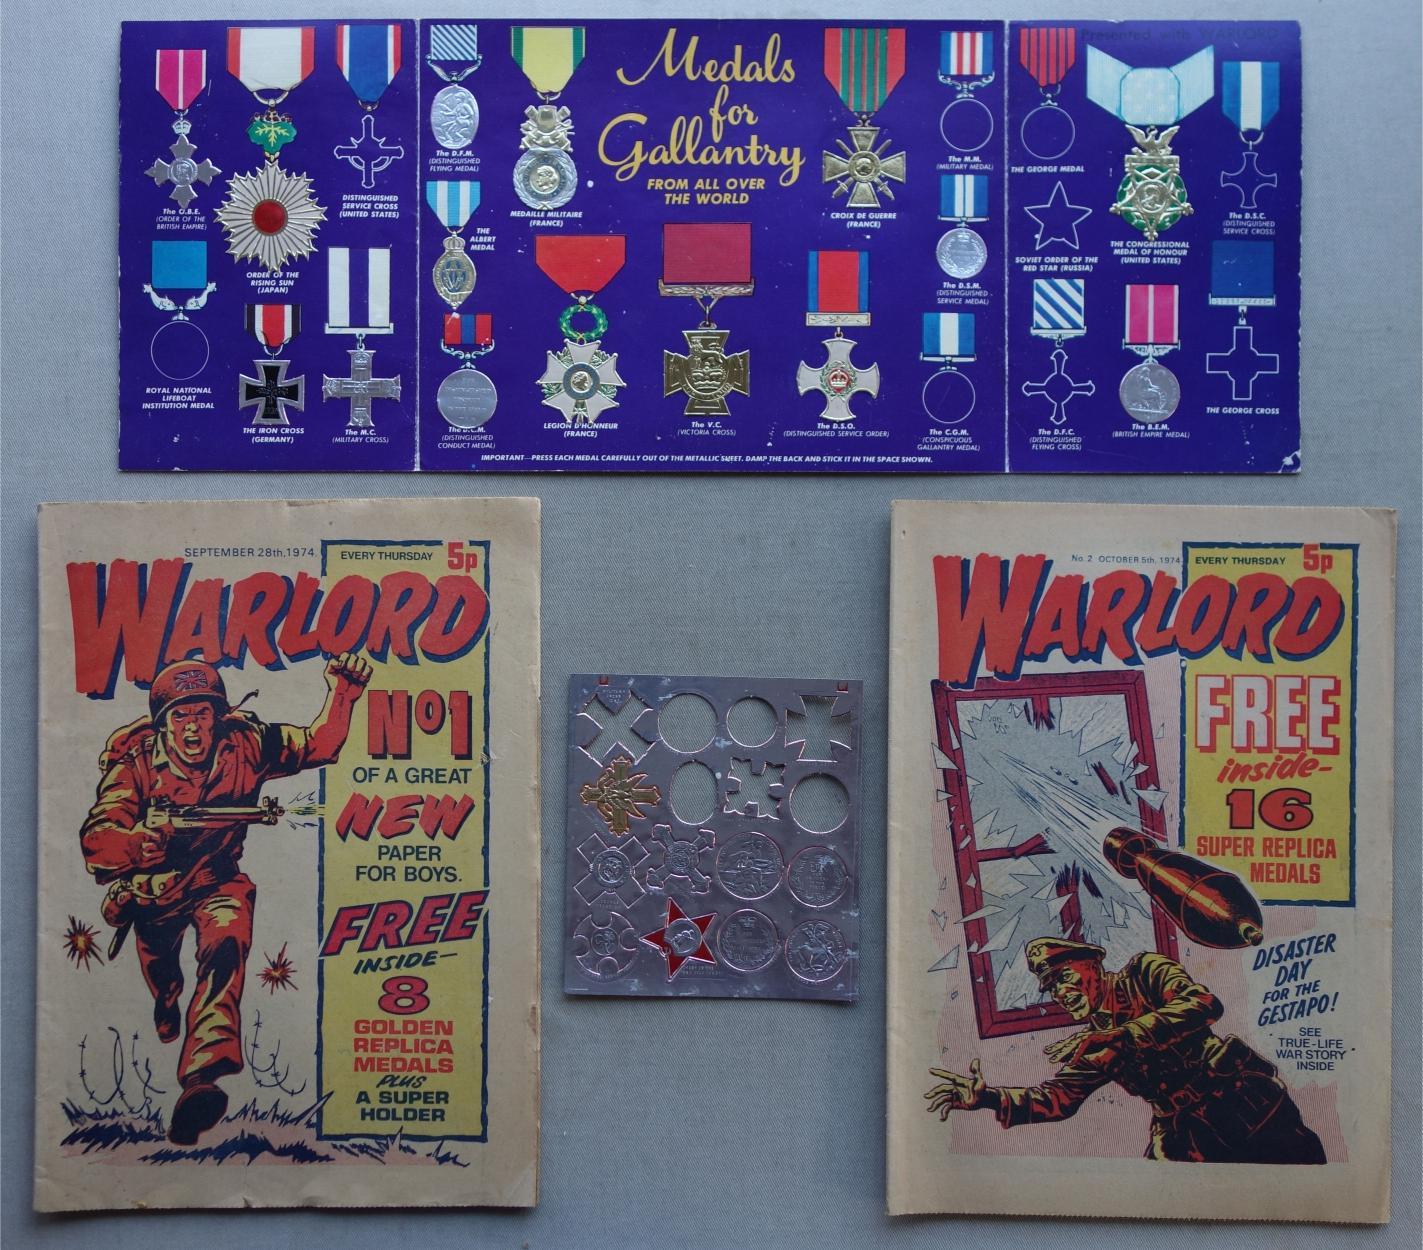 Warlord No. 1 and 2, Septmber/ October 1974, With Free Gifts